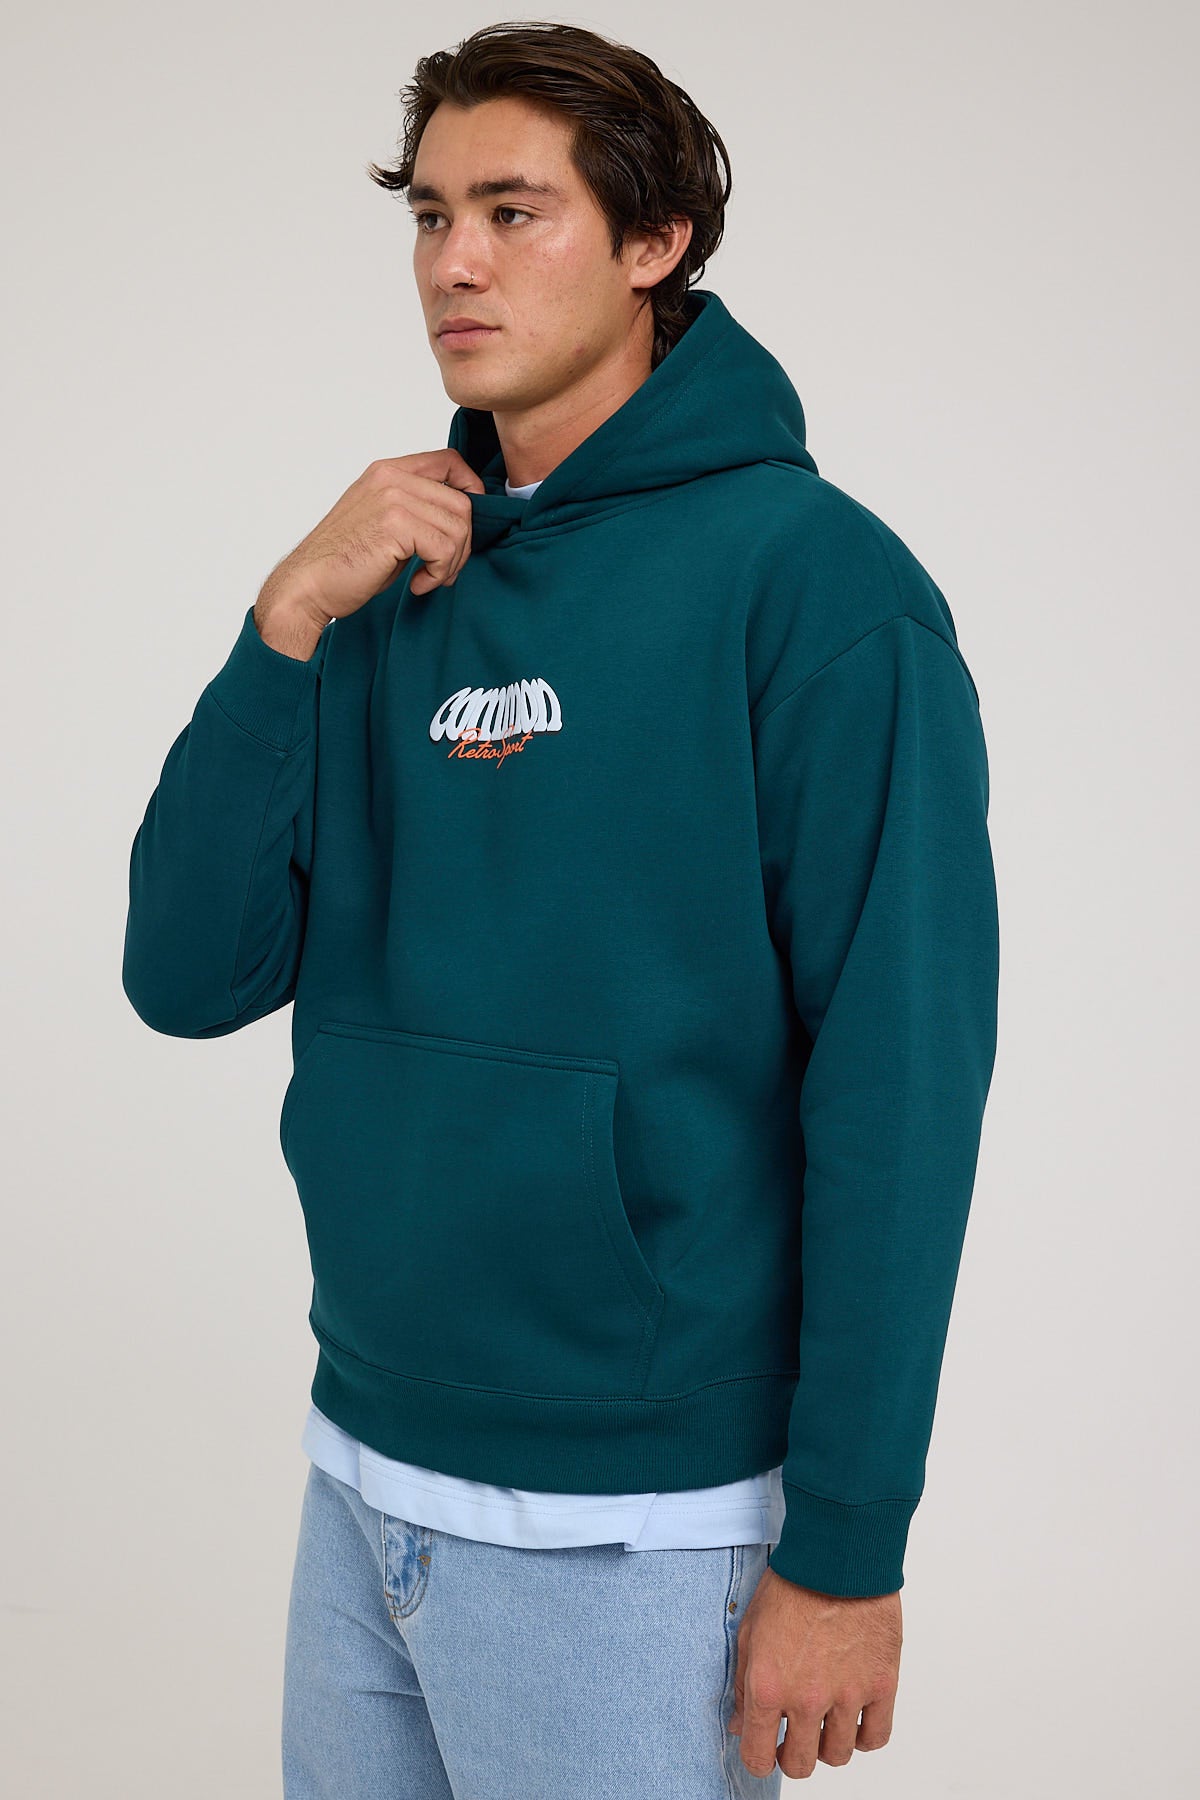 Common Need Archives Hoodie Teal